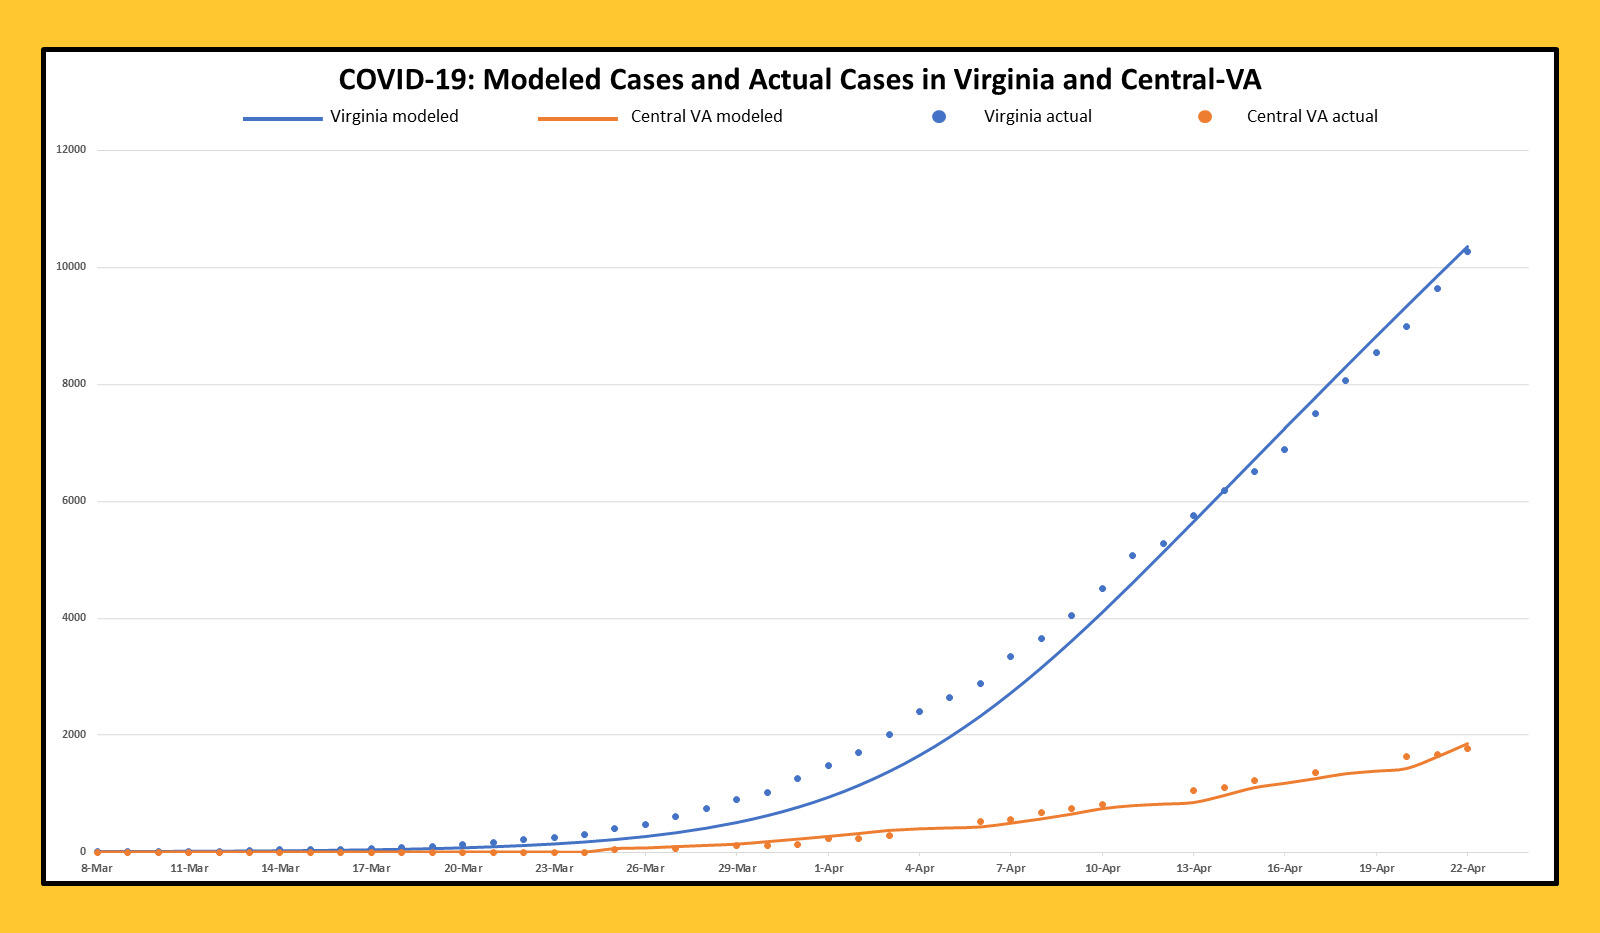 It is the nature of data models to become more reliable as they acquire more data, Ghosh said, as shown on this graph comparing the model’s predicted cases and the actual reported cases in the state and region. (VCU College of Engineering)